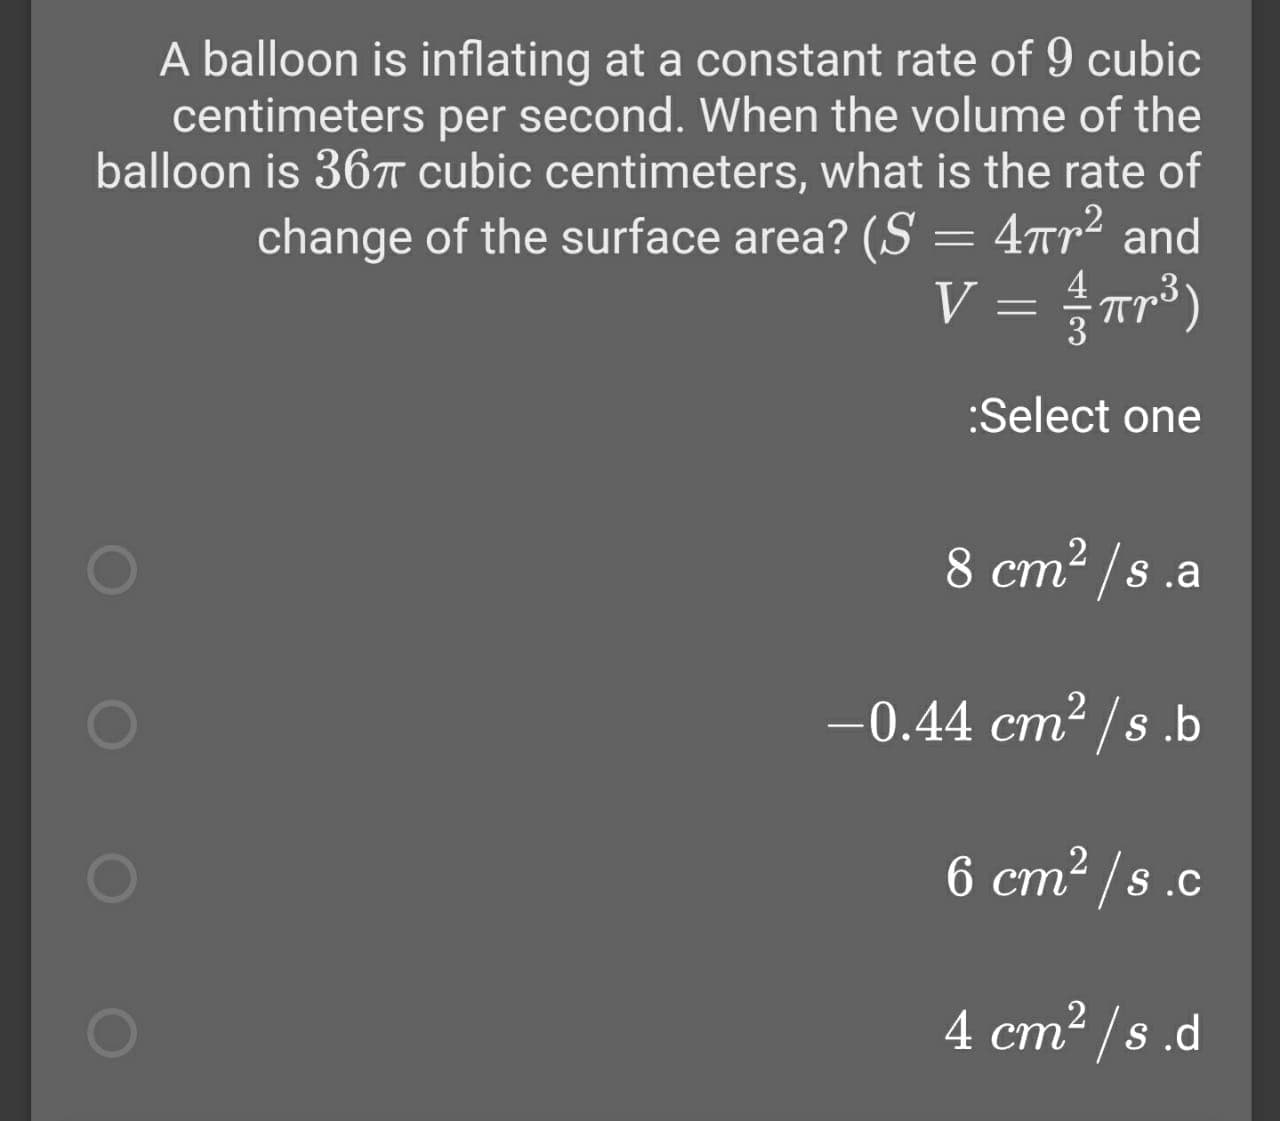 A balloon is inflating at a constant rate of 9 cubic
centimeters per second. When the volume of the
balloon is 367T cubic centimeters, what is the rate of
change of the surface area? (S = 4rr² and
V = Tr*)
%3|
:Select one
8 cm2 /s.a
-0.44 cm2 /s.b
ст
6 cm2 /s .c
4 ст* /s .d
